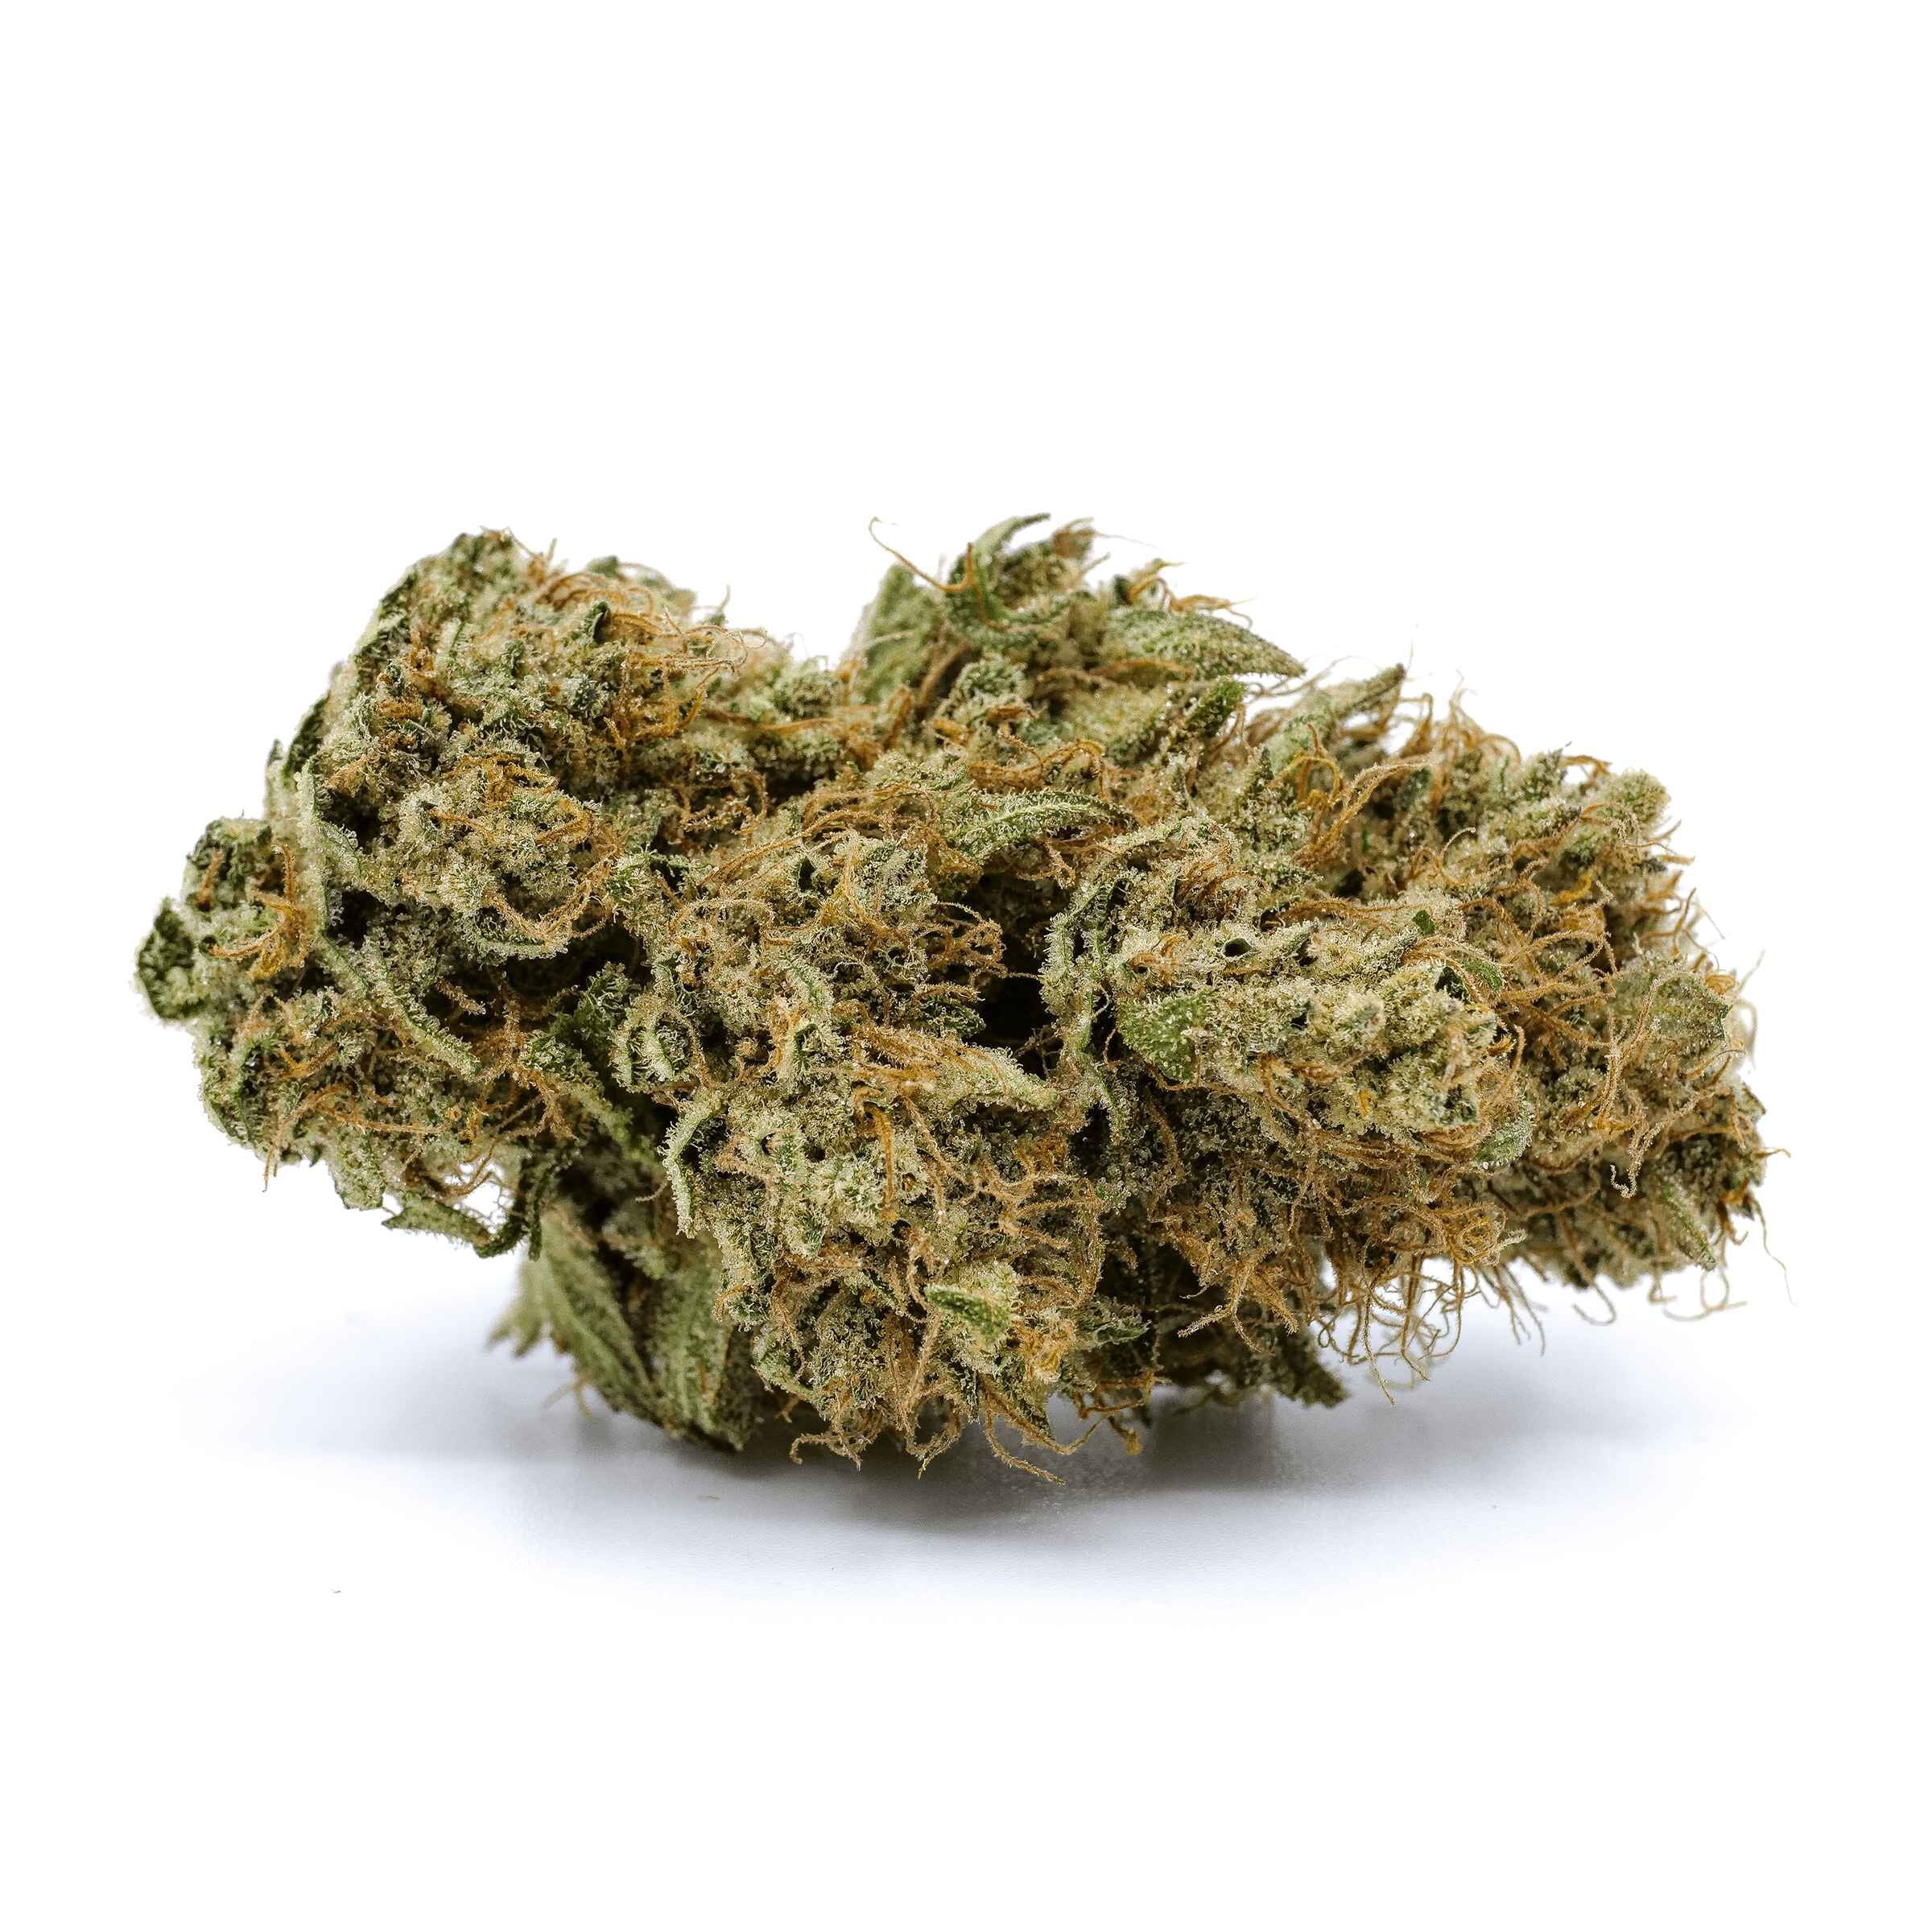 Cannabis Product Cold Creek Kush by Redecan - 0